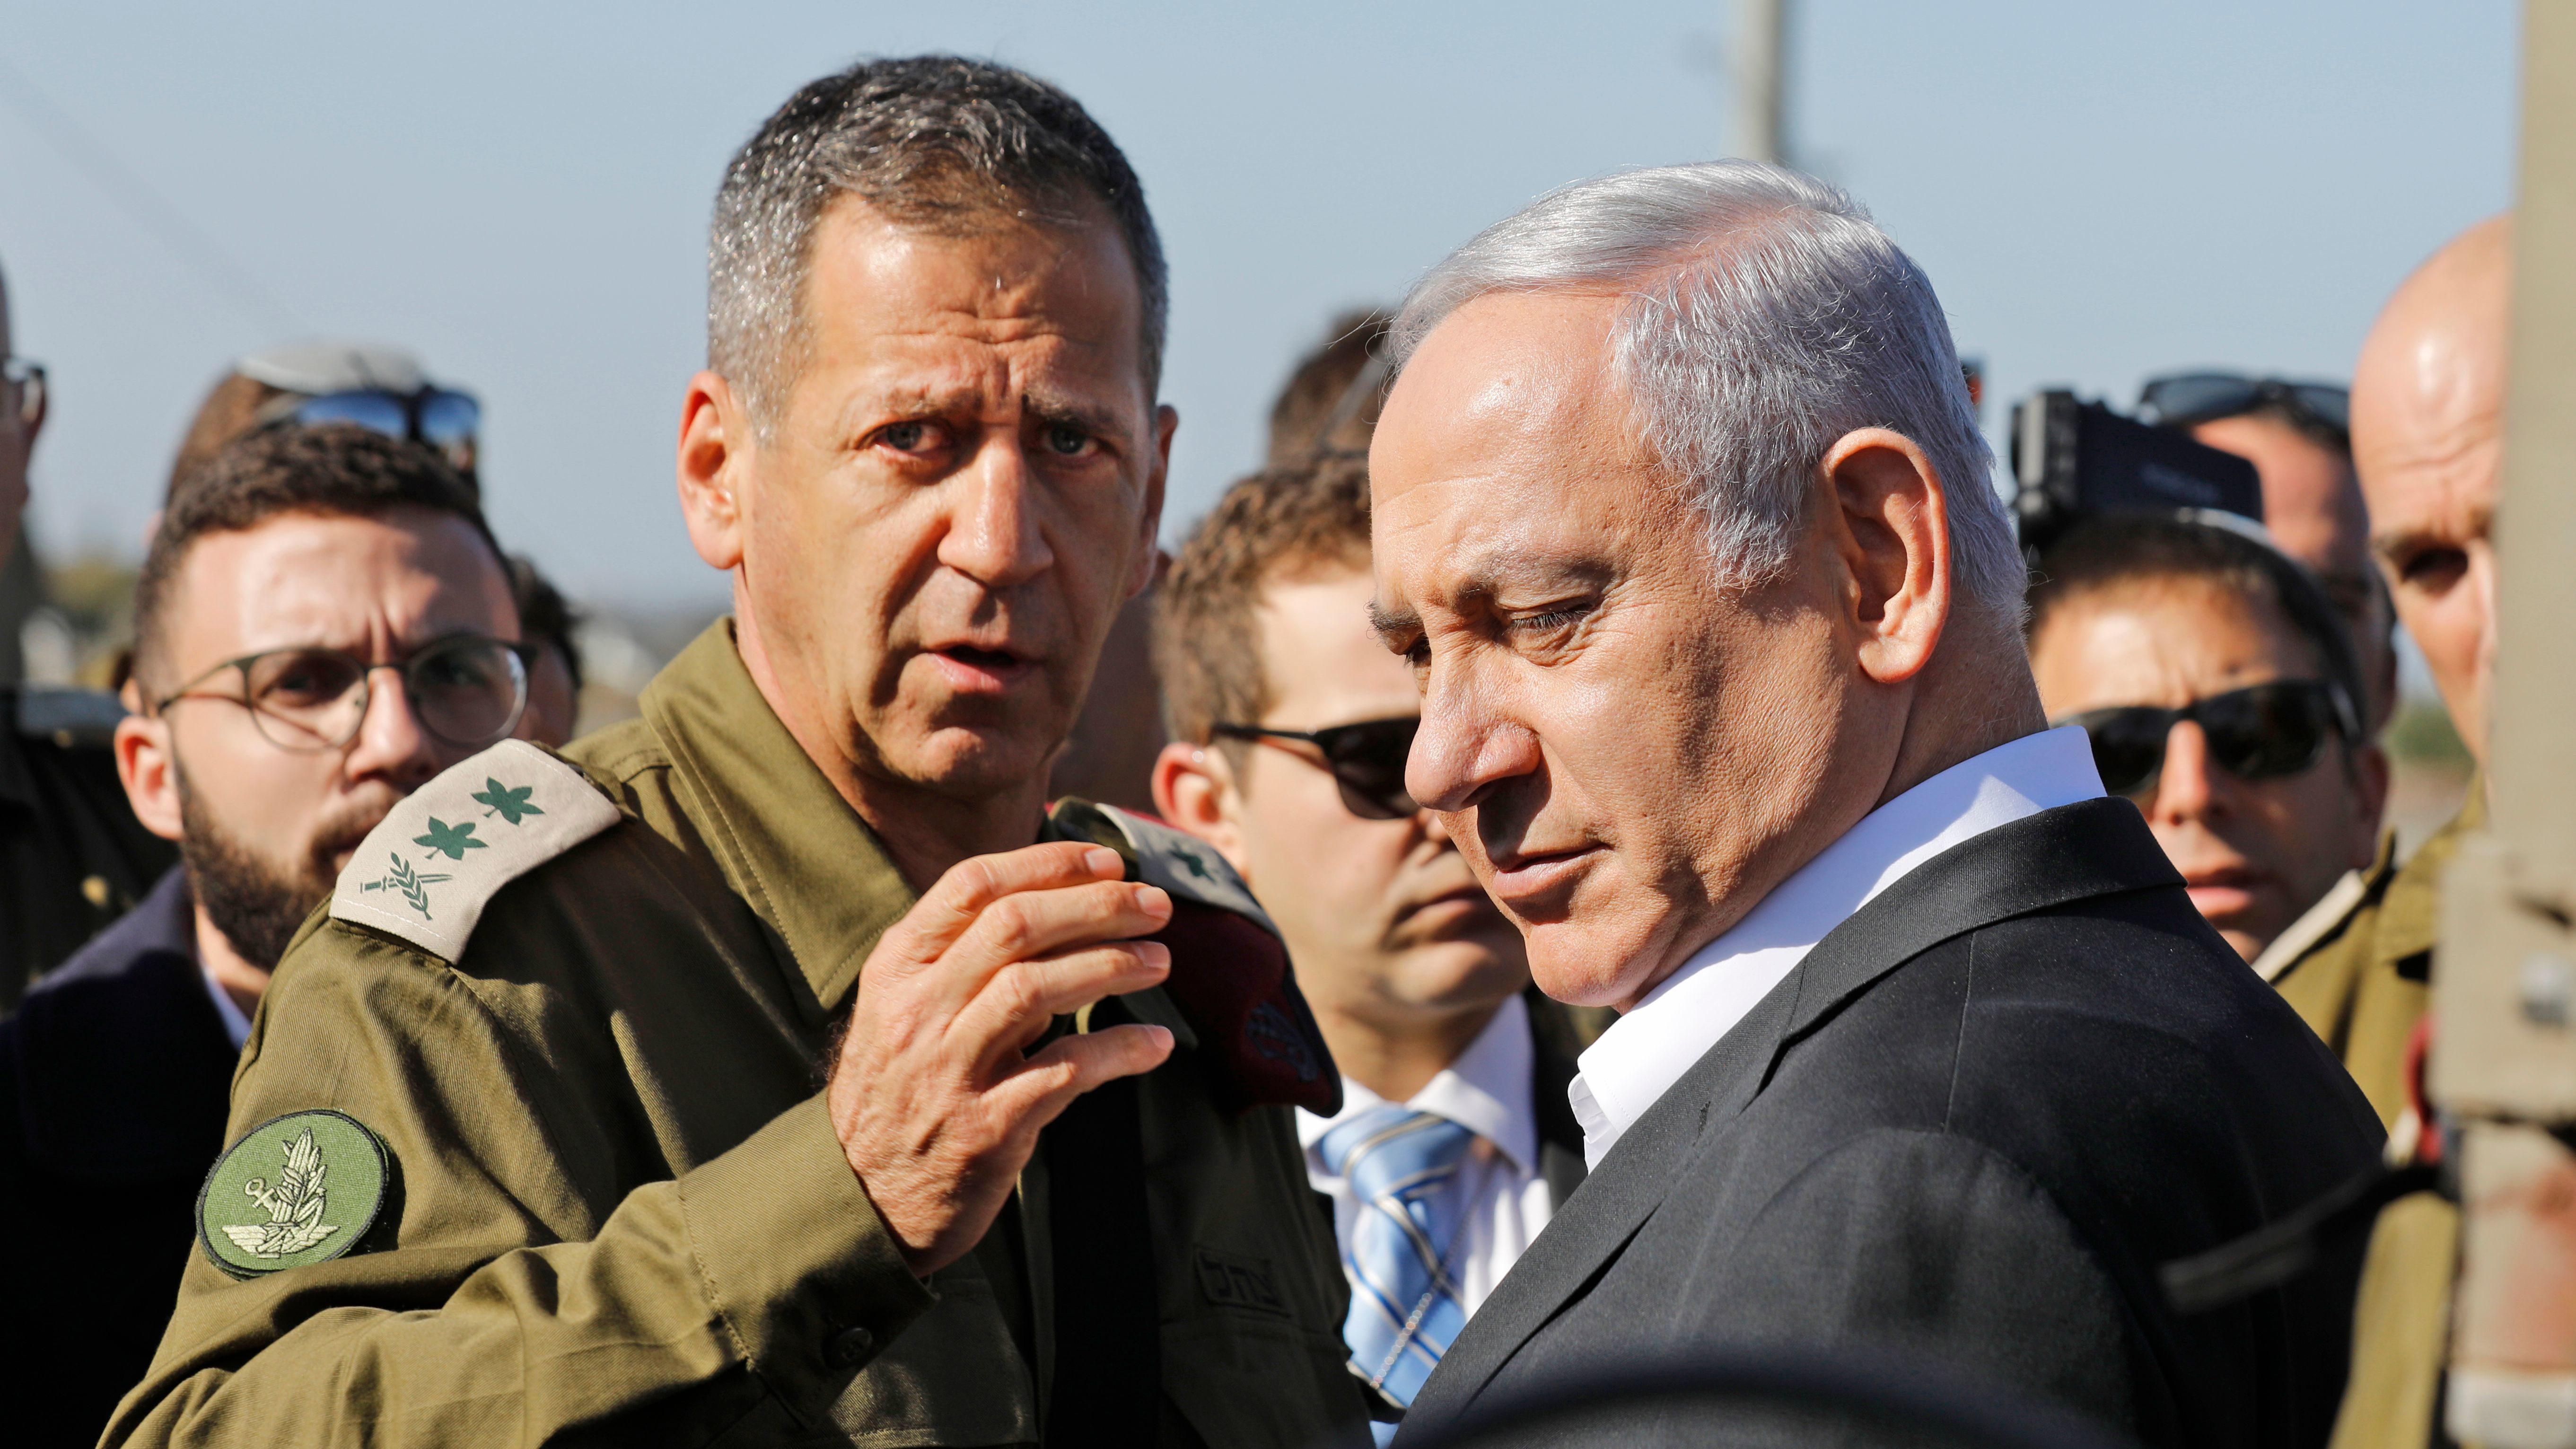 Plain Talk by Israel’s Top Soldier Seen as Filling Political Vacuum